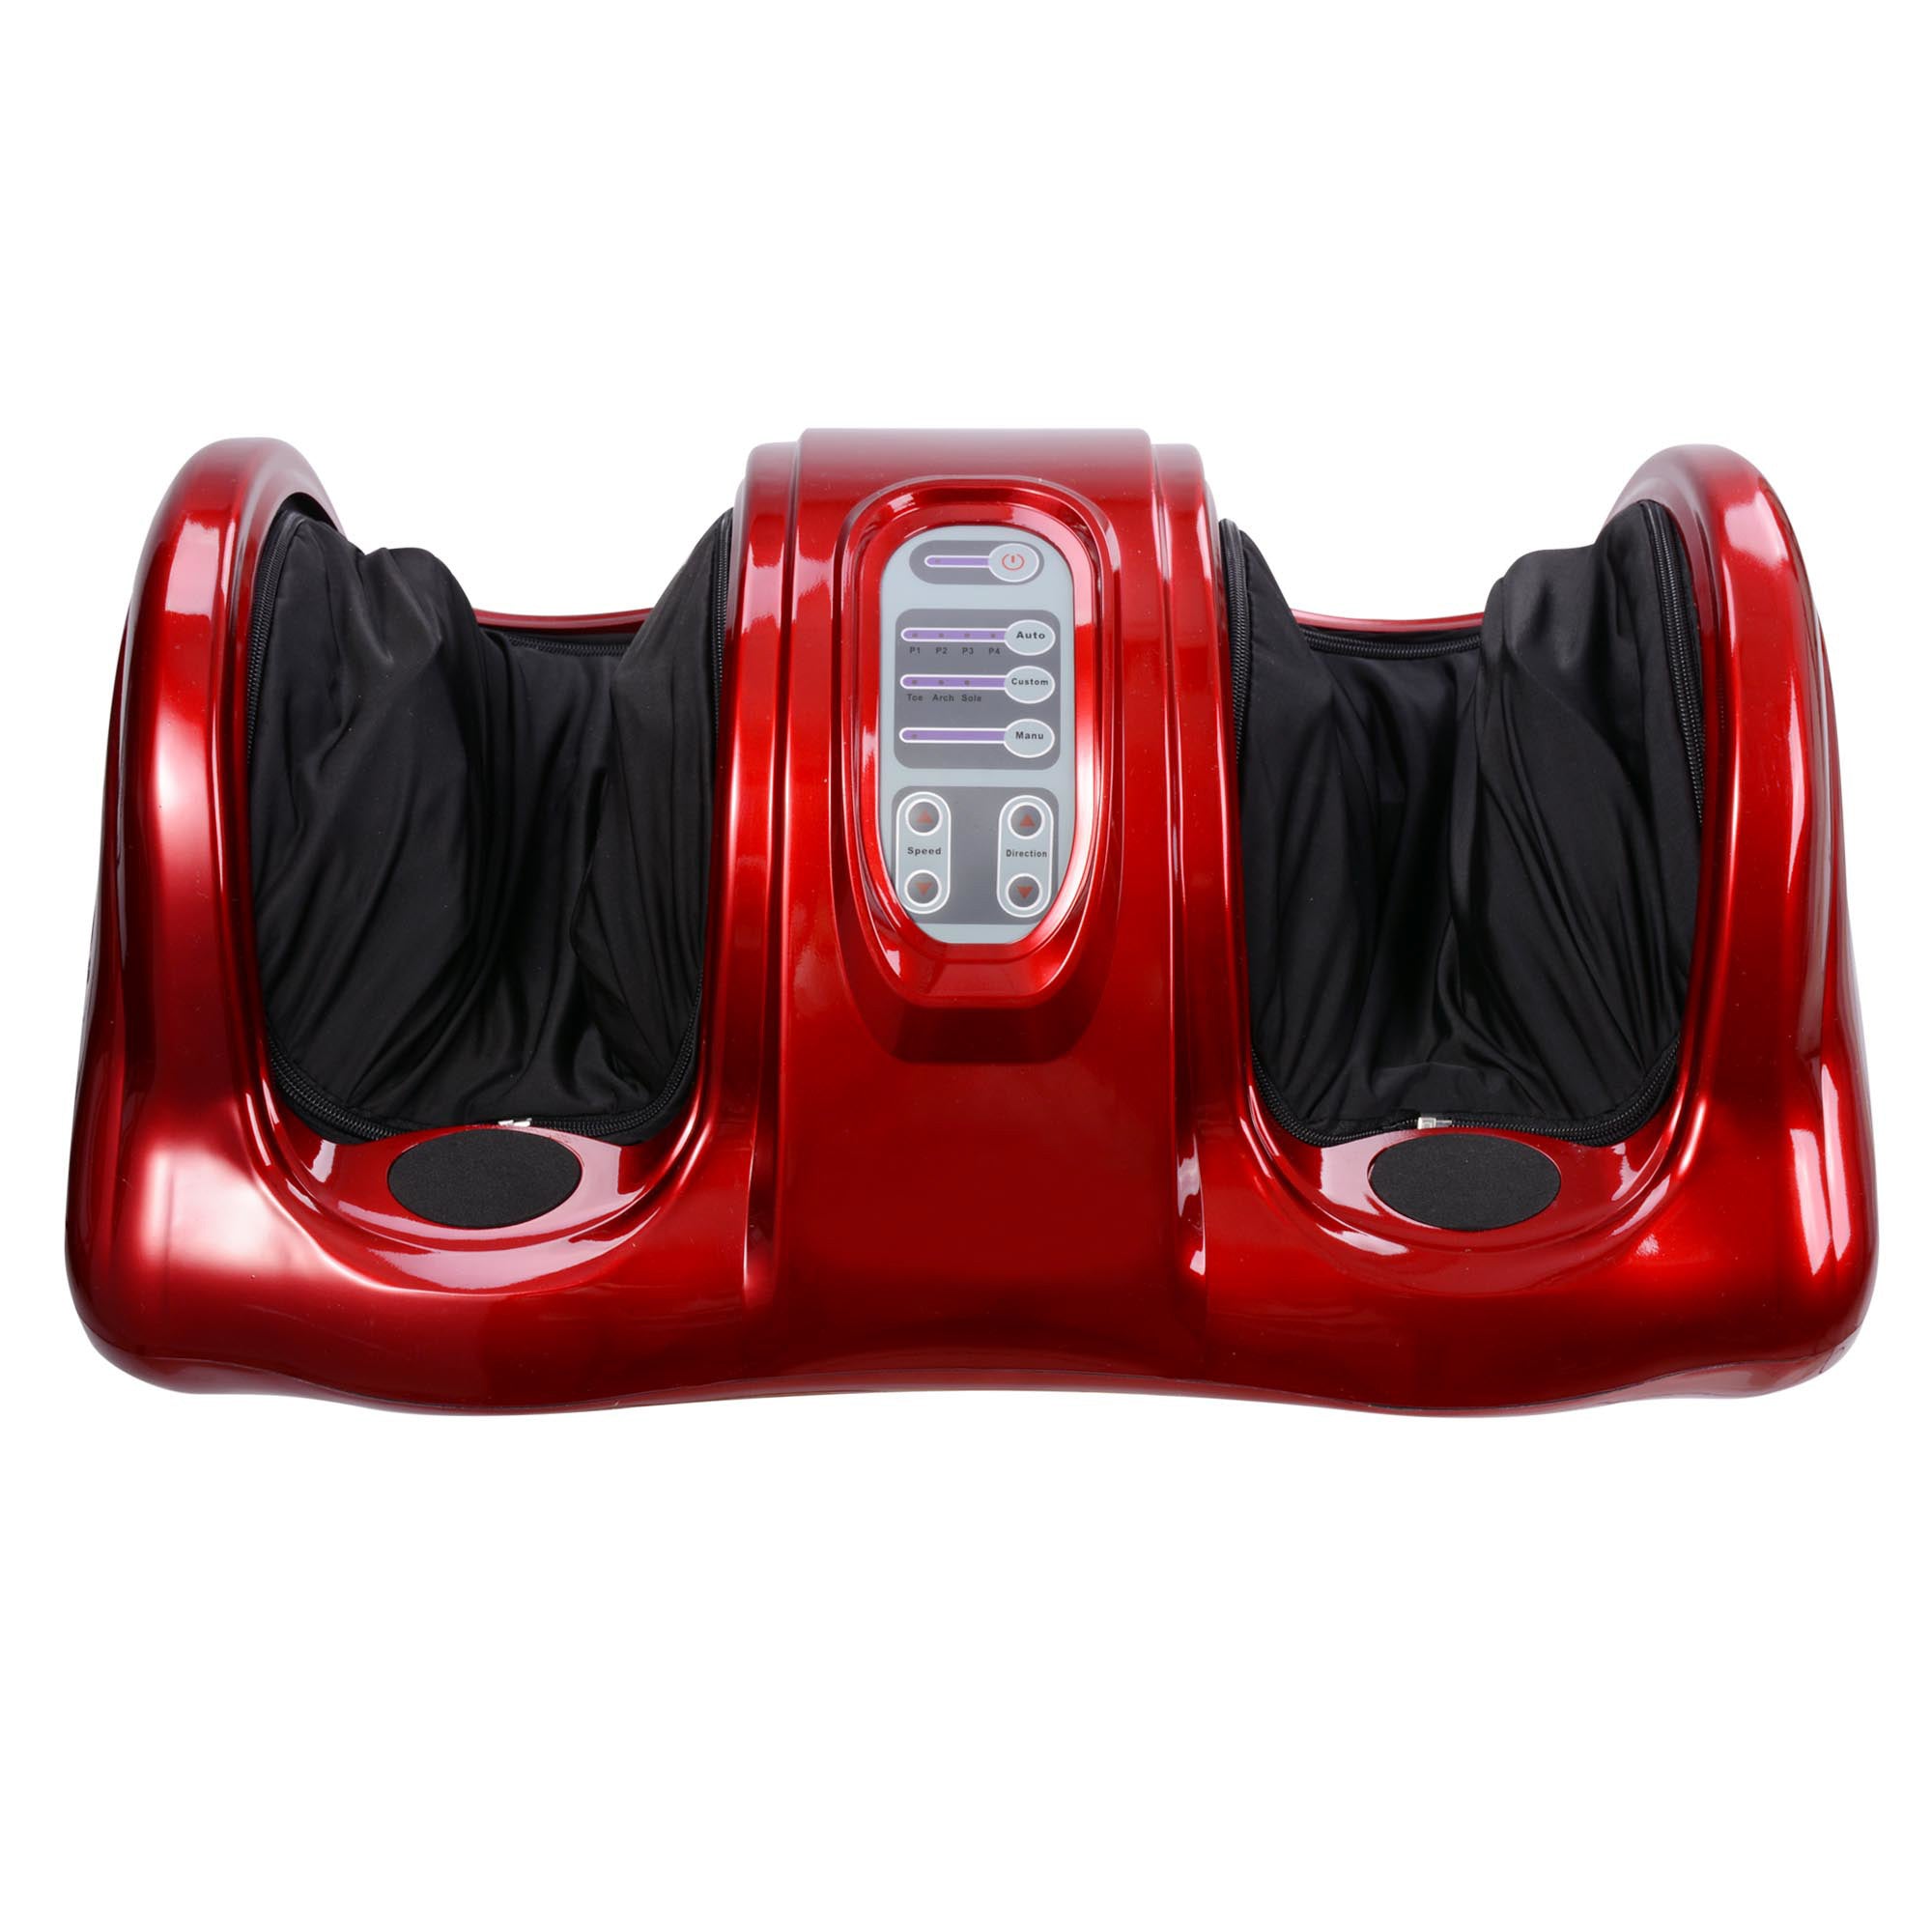 Front view of the Foot Massager